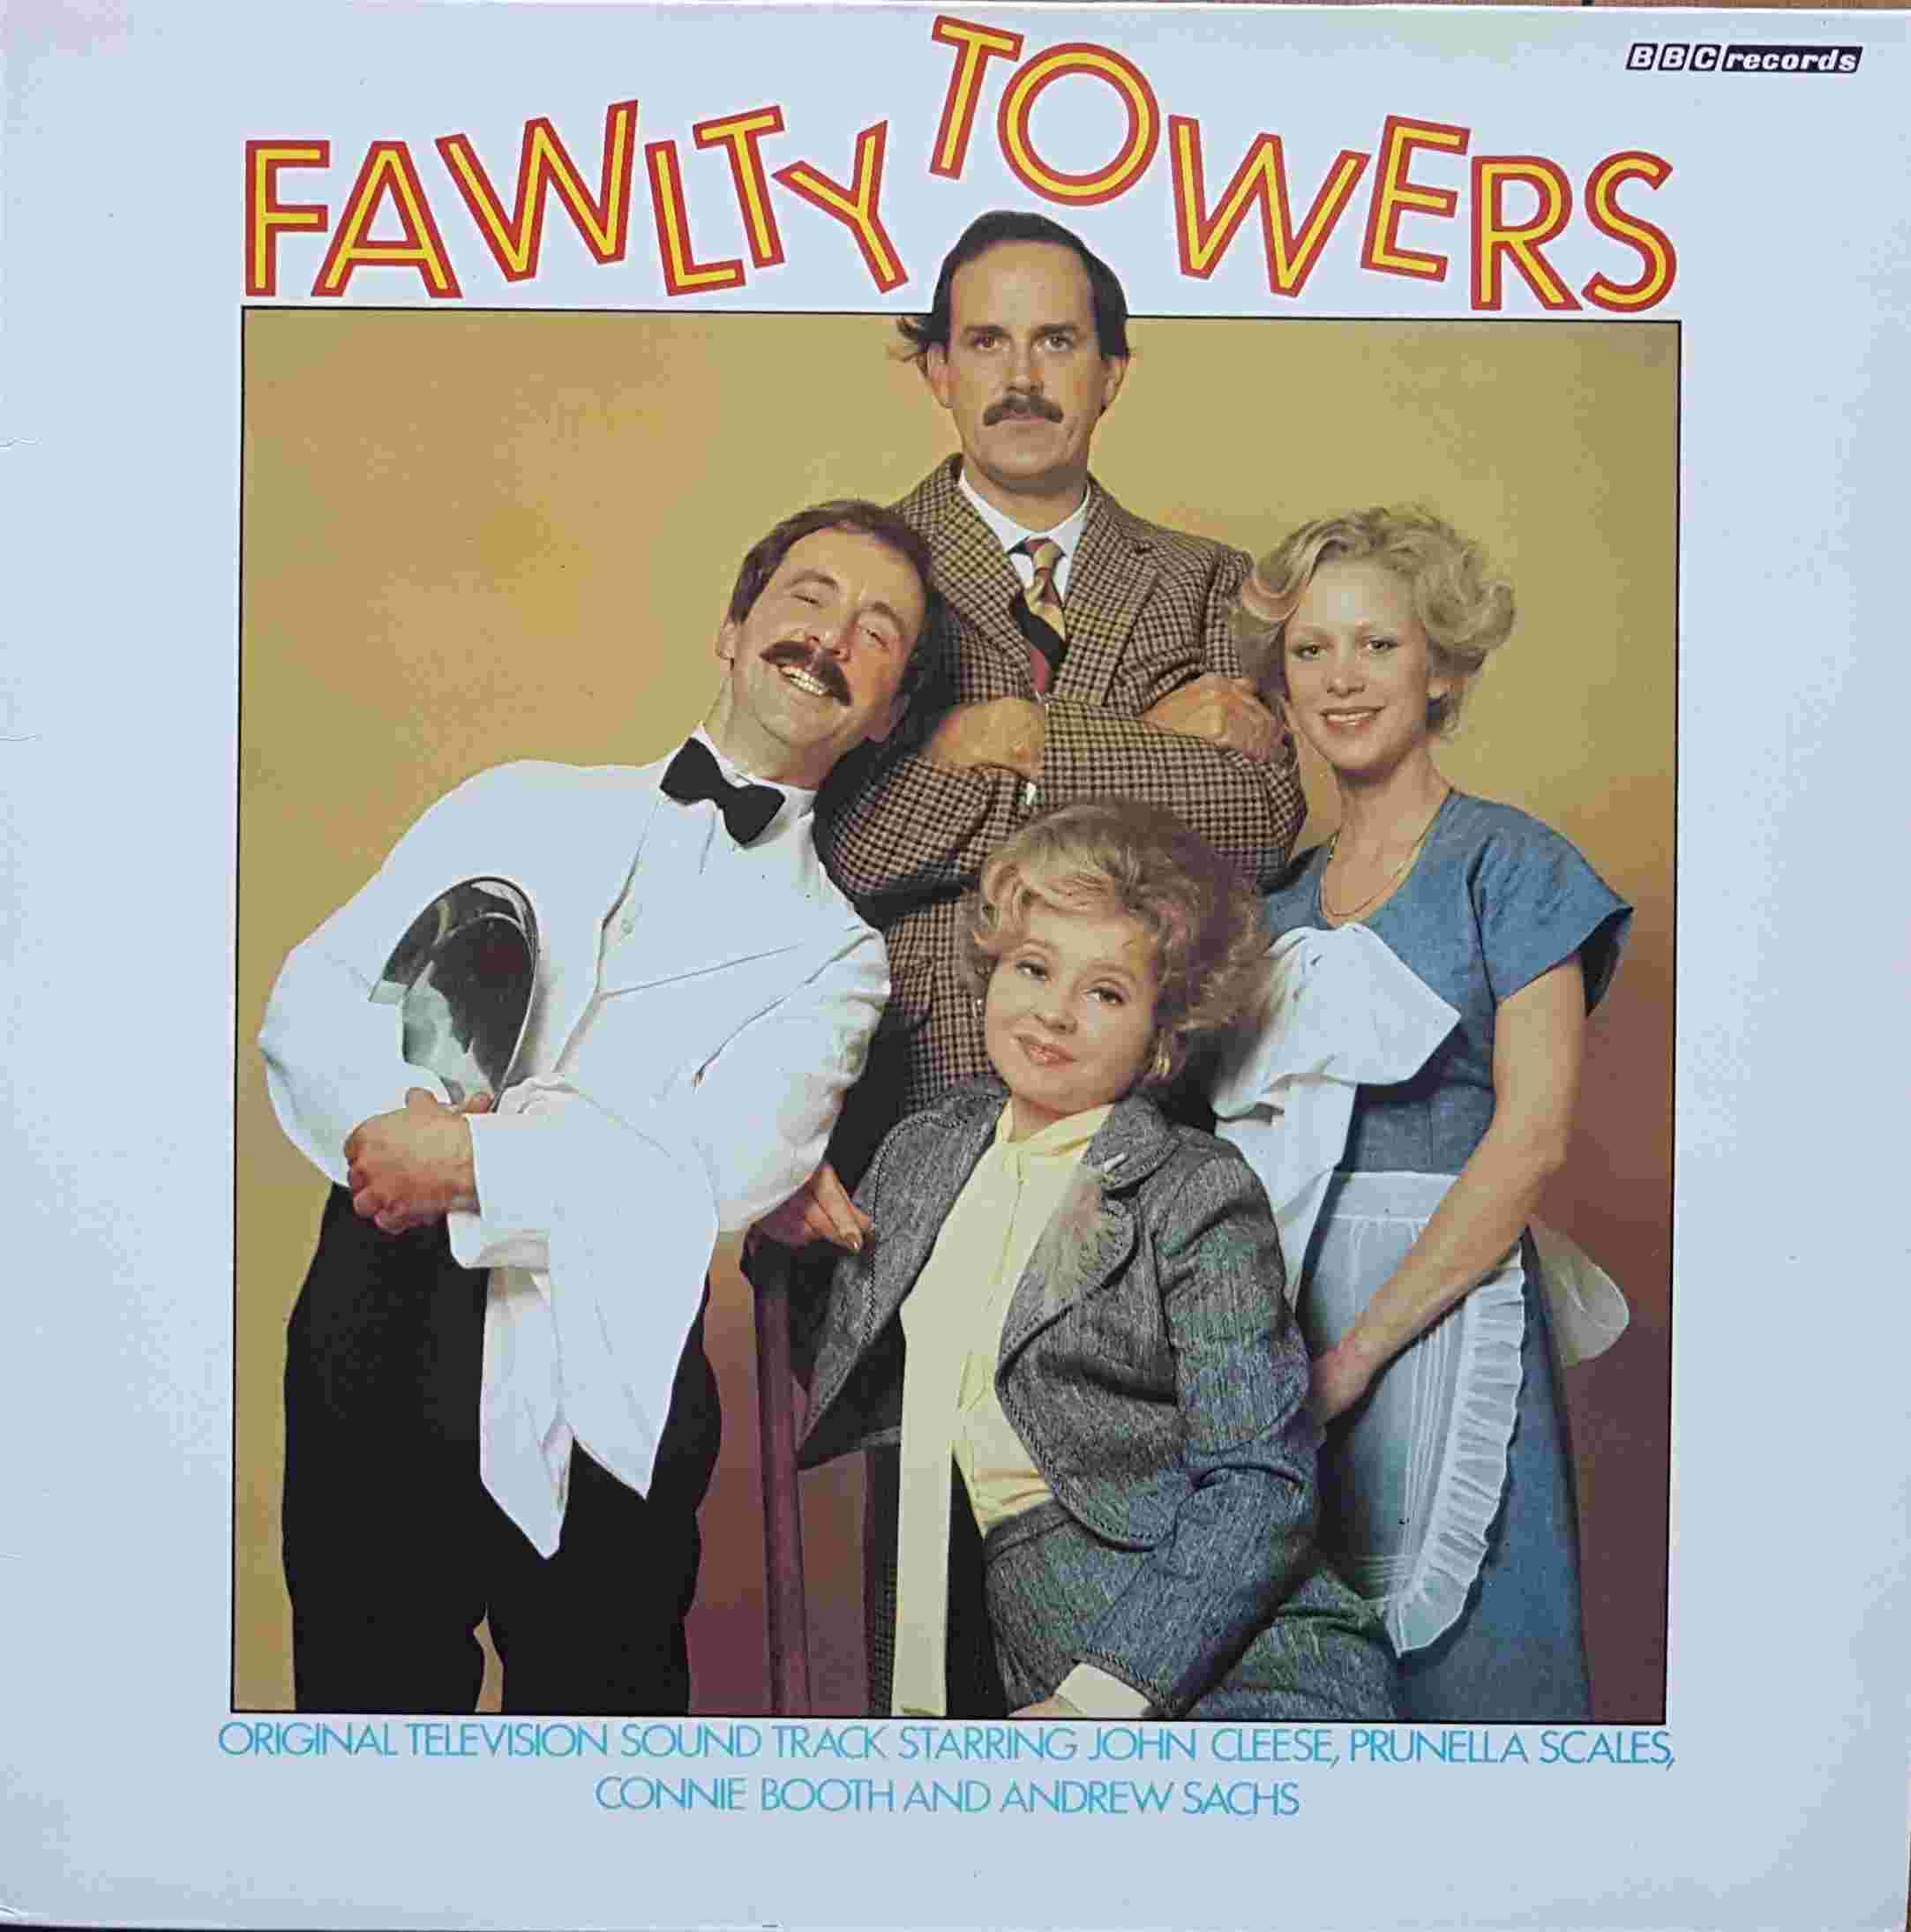 Picture of REB 377 Fawlty Towers by artist John Cleese / Connie Booth from the BBC albums - Records and Tapes library